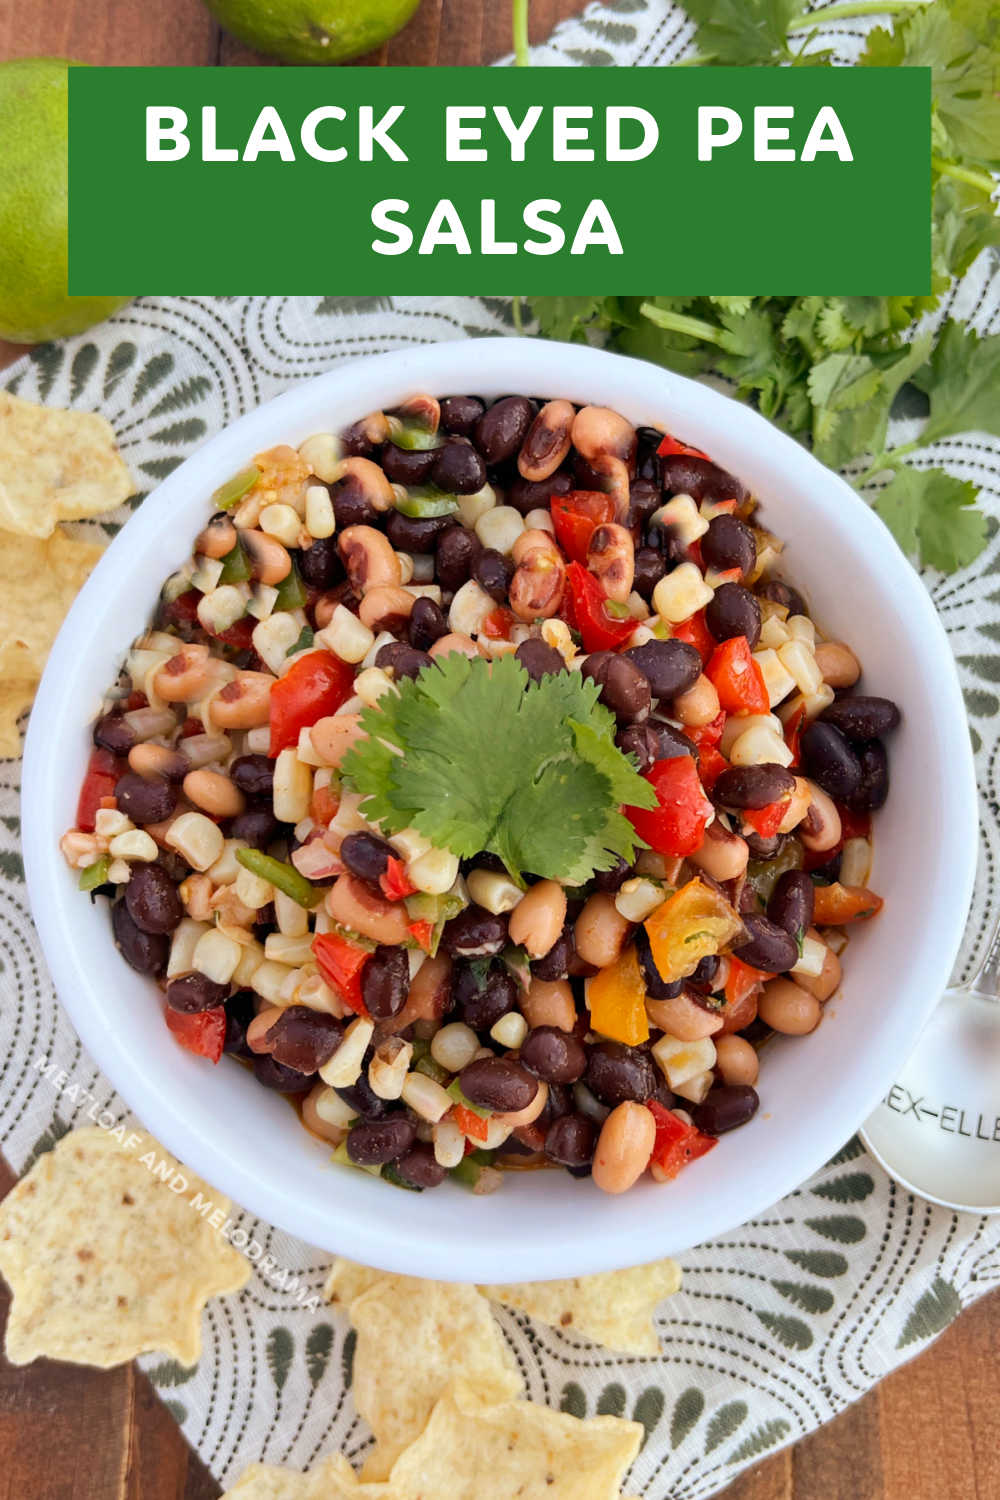 Black Eyed Pea Salsa or Cowboy Caviar is a delicious appetizer made with black eyed peas, black beans and sweet corn. Just add your favorite tortilla chips for a healthy chip dip! via @meamel